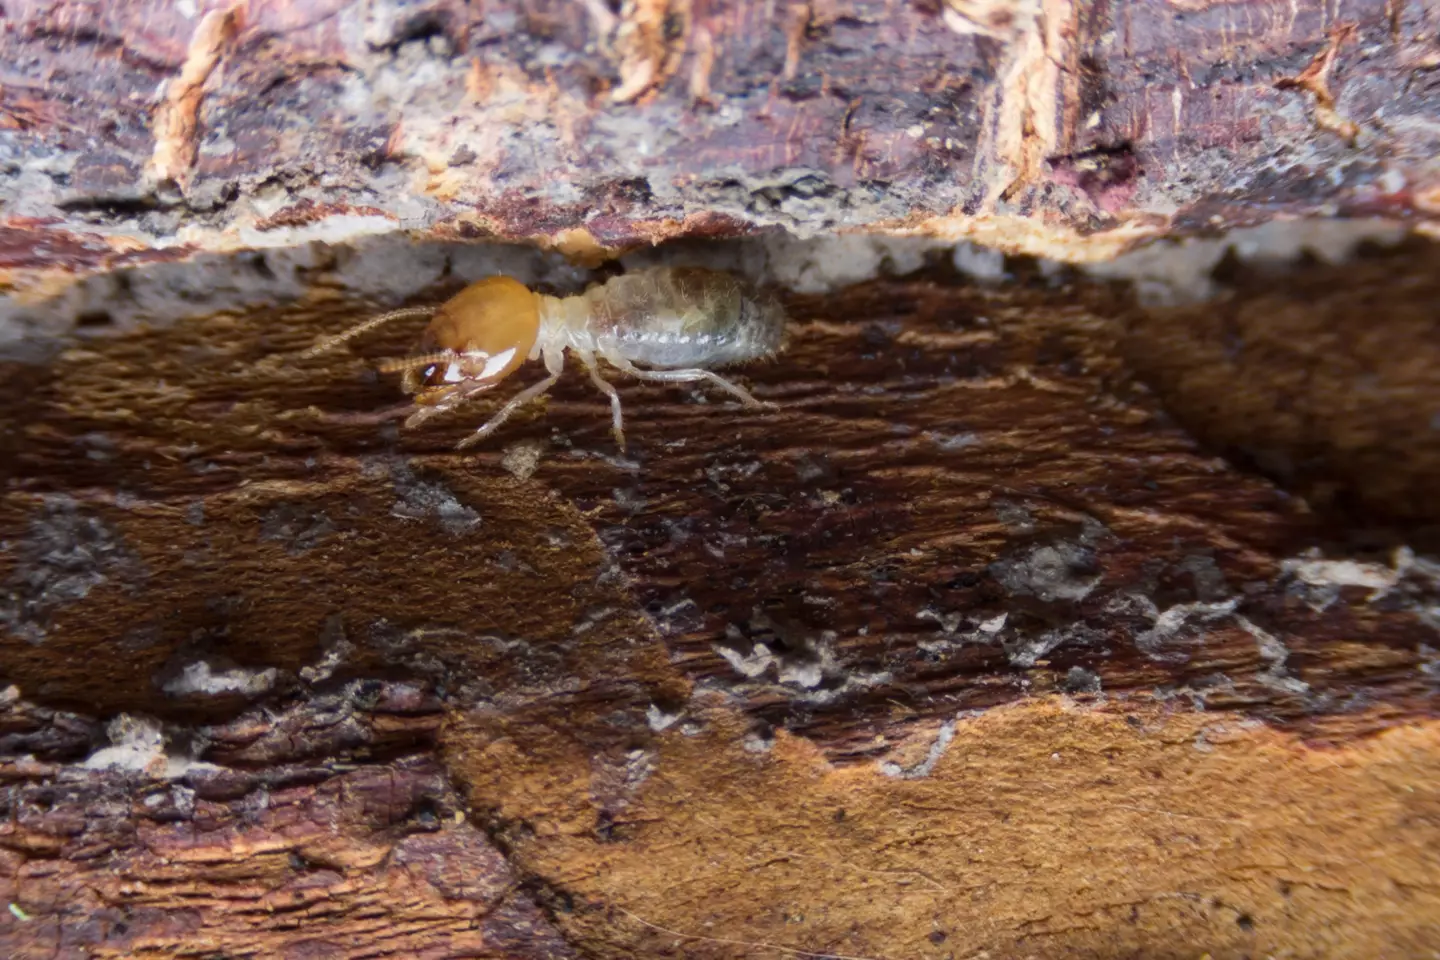 Termites are referred to as 'silent destroyers'.